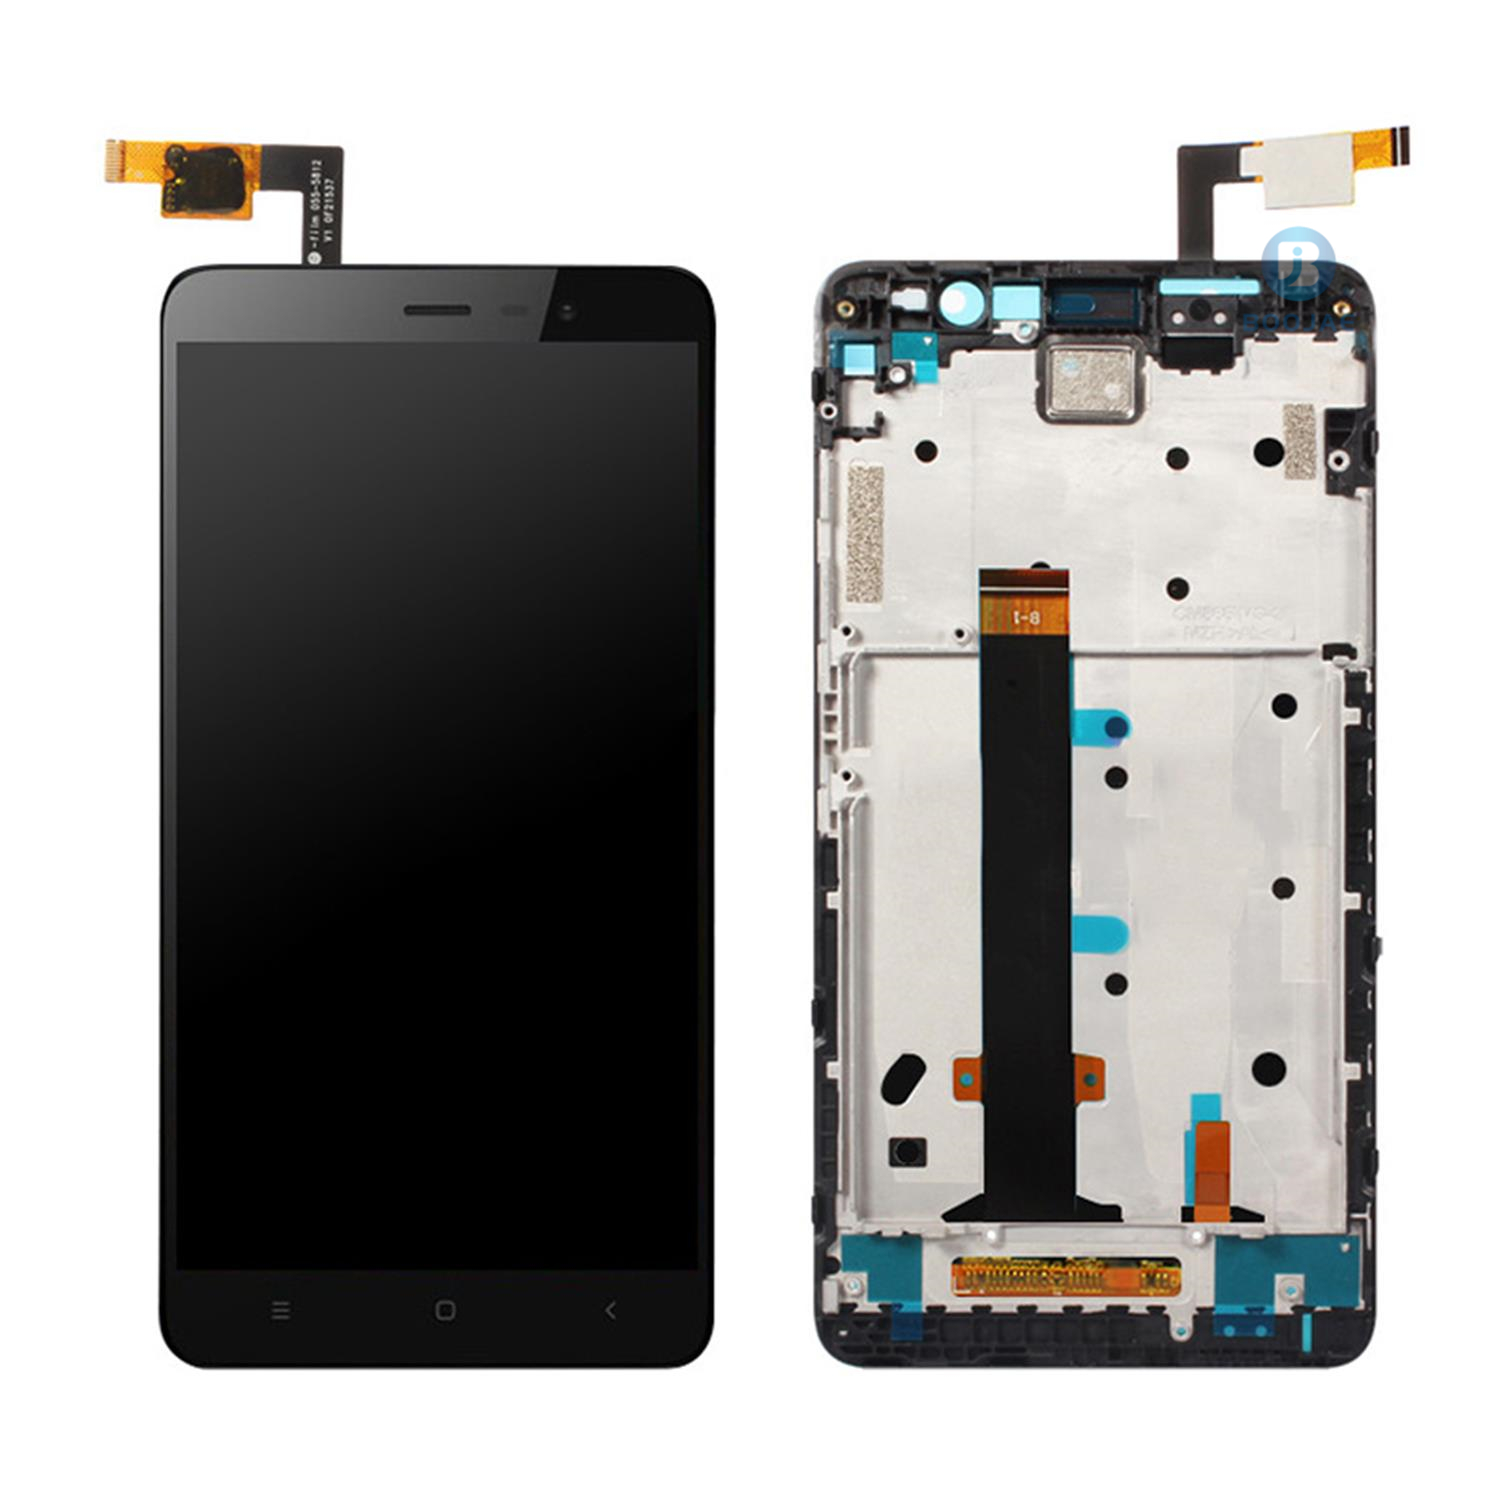 For Xiaomi Redmi Note 3 Pro LCD Screen Display and Touch Panel Digitizer Assembly Replacement